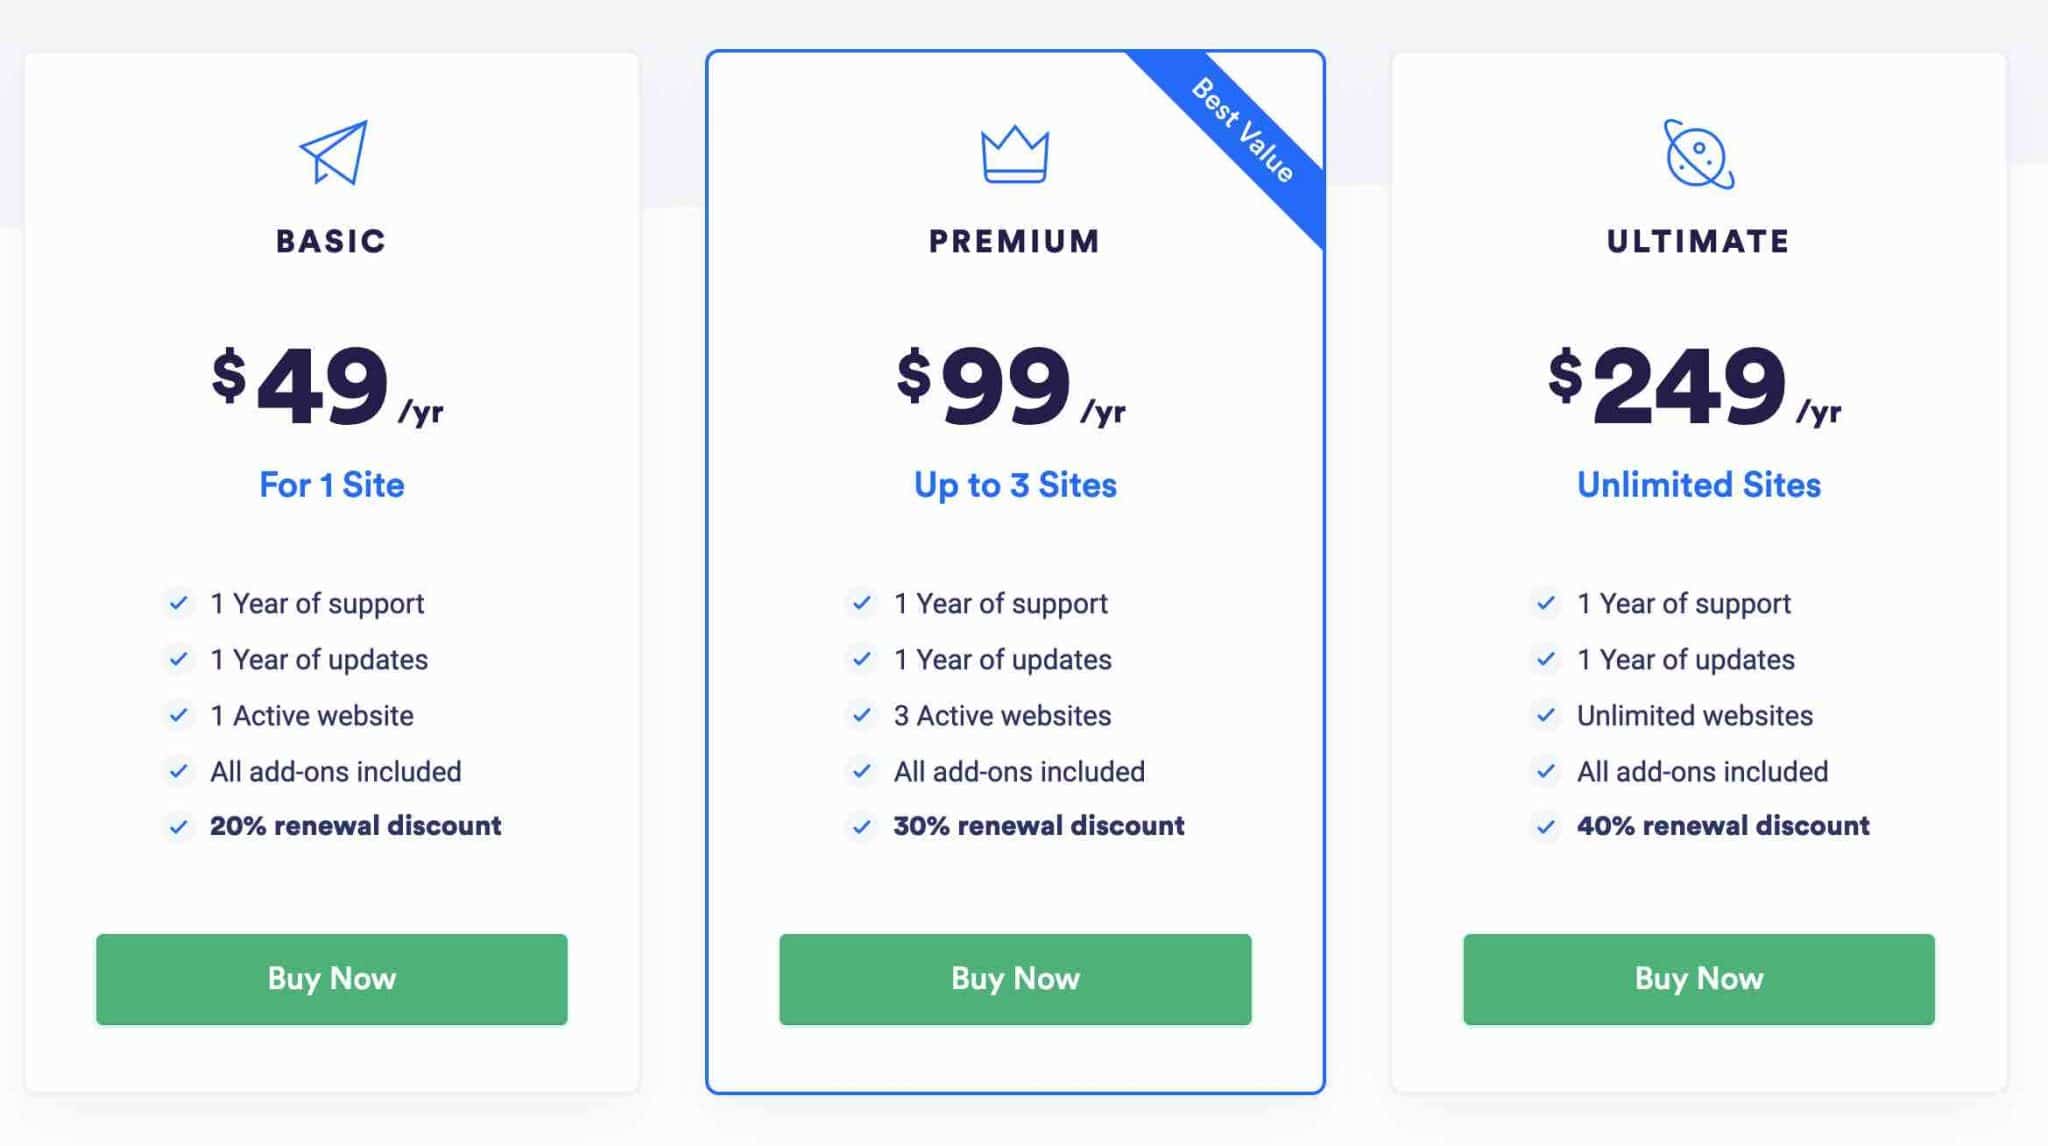 The pricing offered by WP Grid Builder.